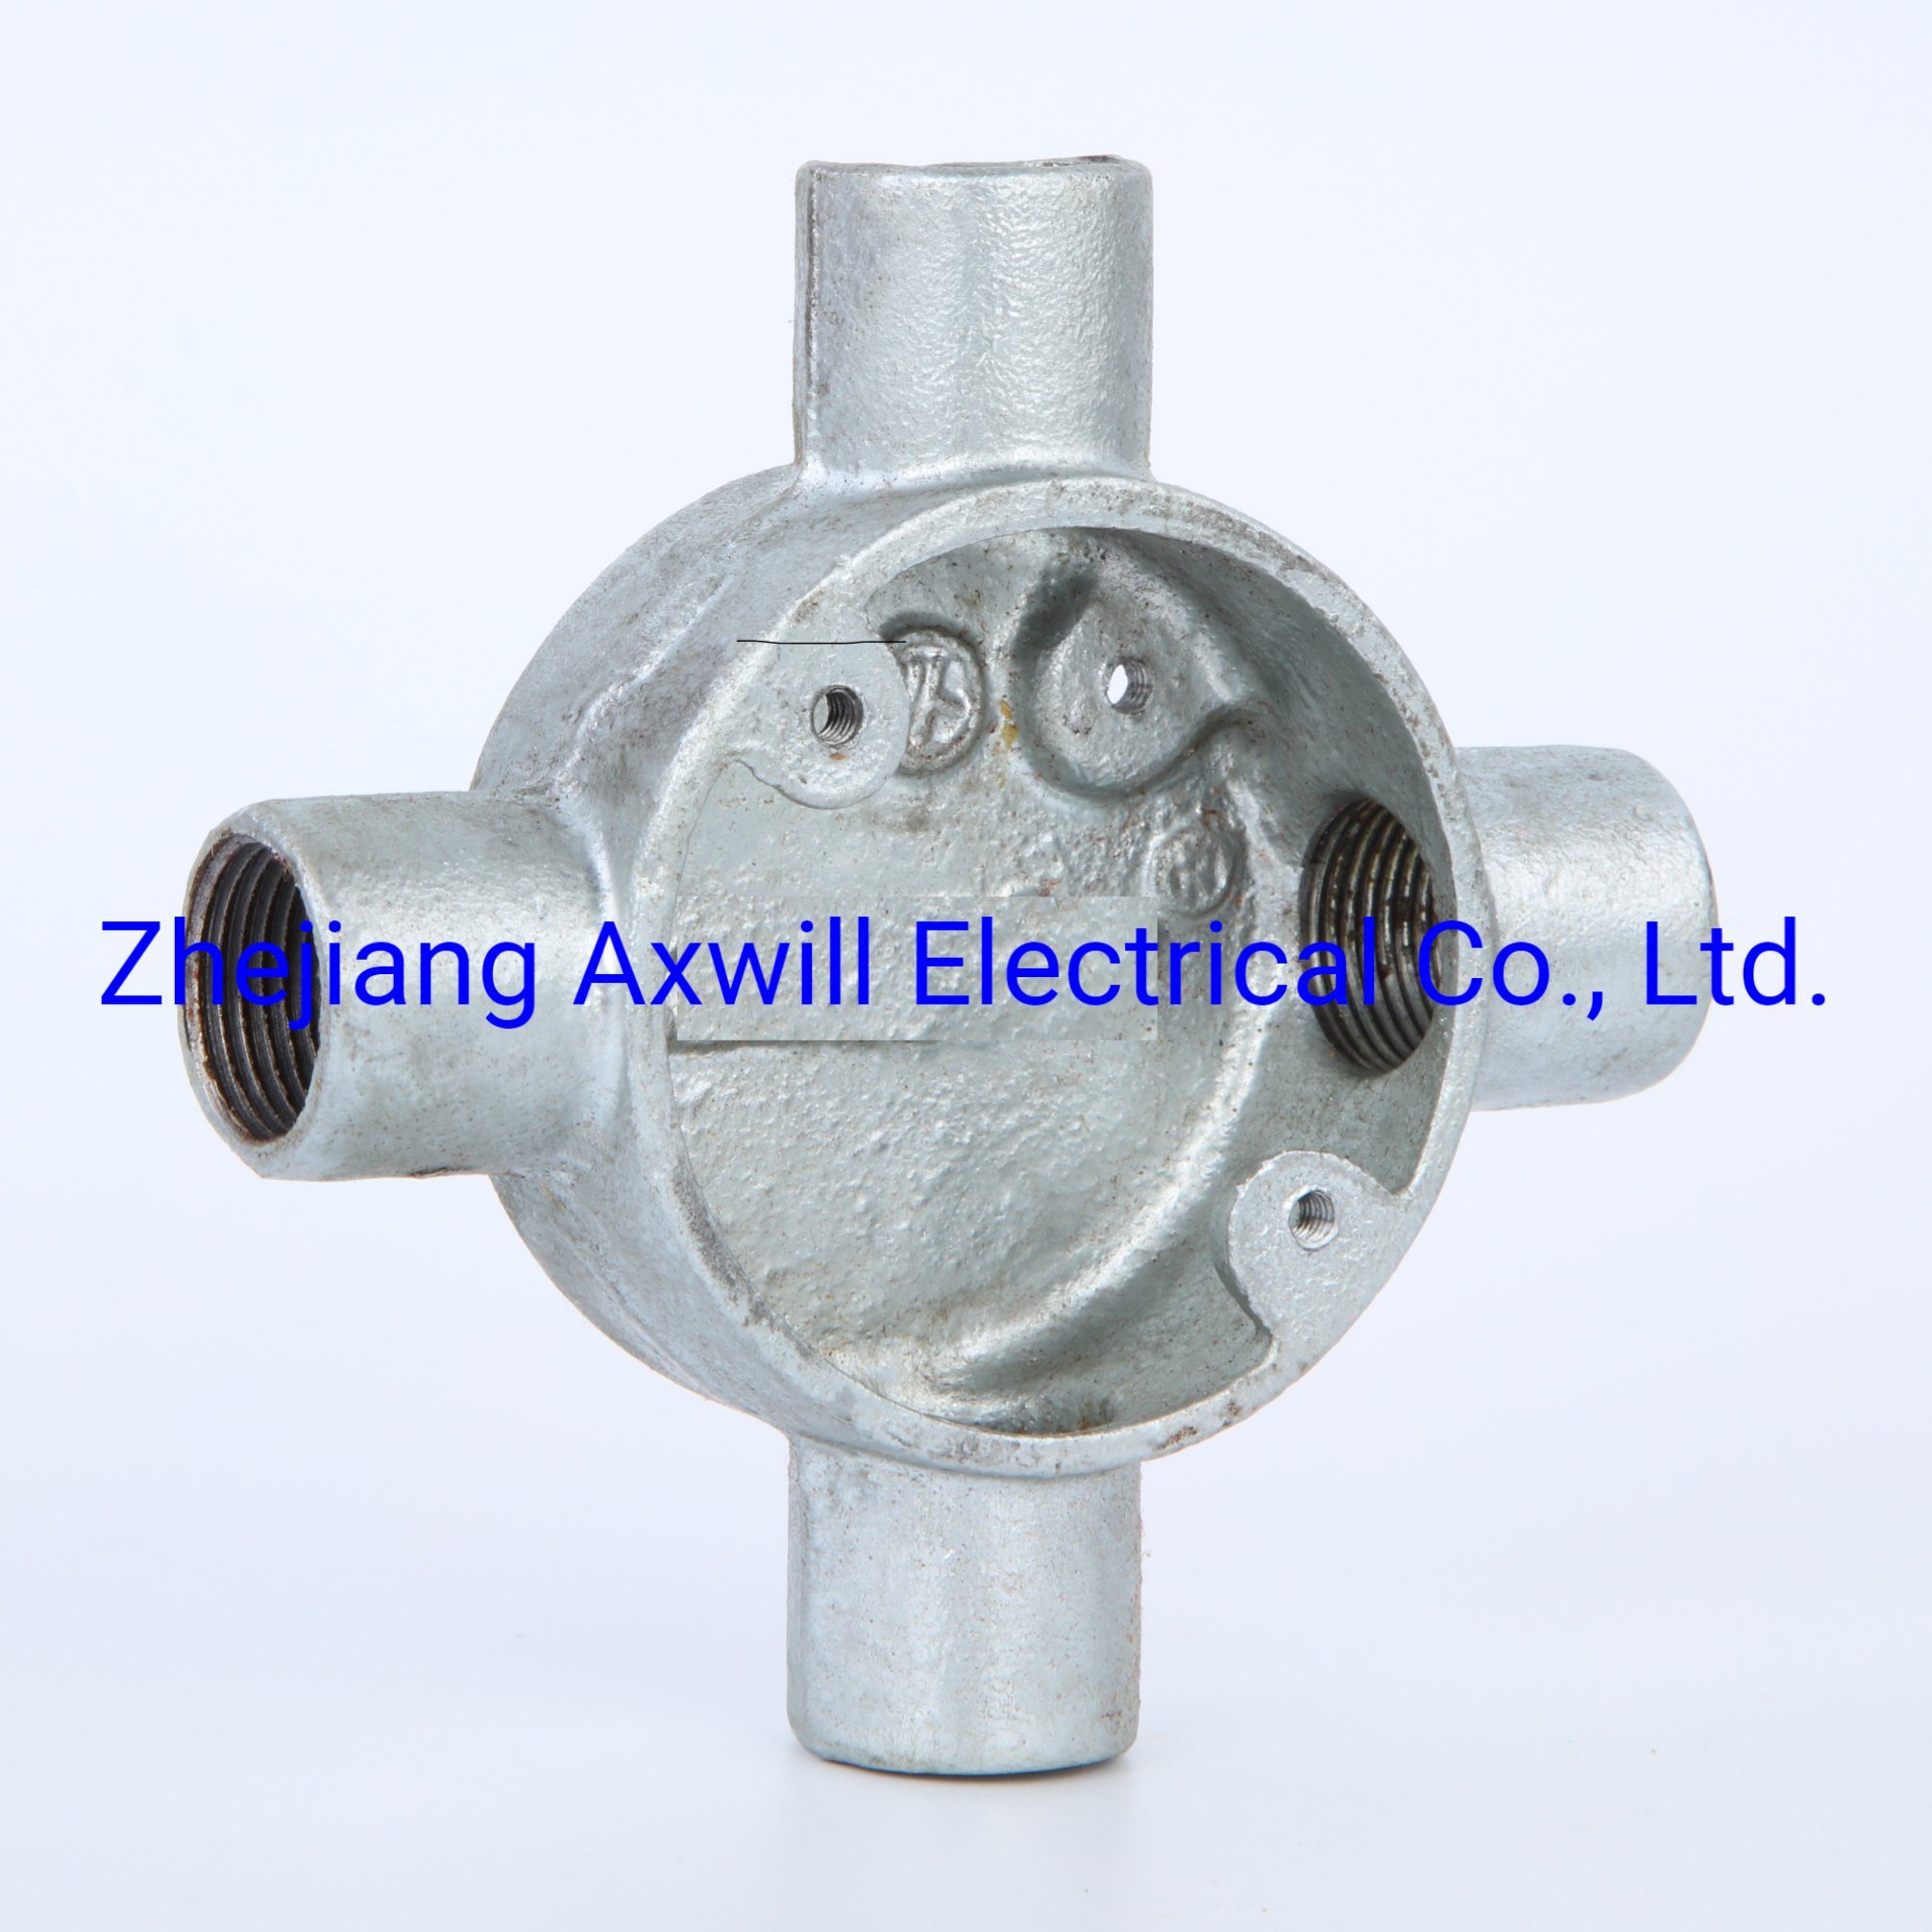 2021 UL Listed Conduit Malleable Iron Junction Terminal 2 Way Boxes